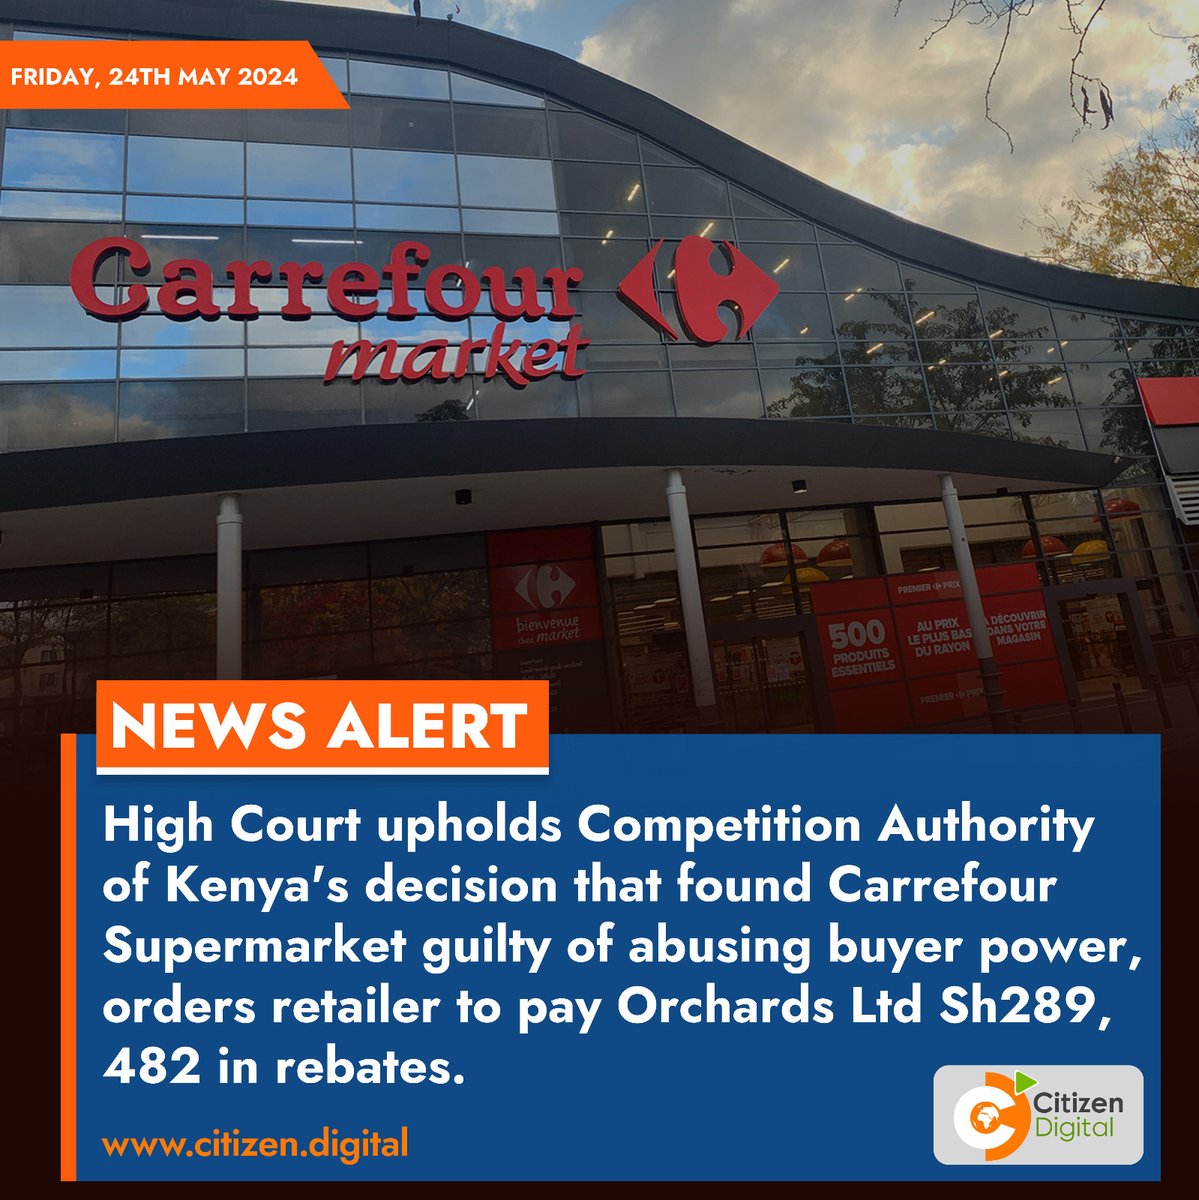 High Court upholds Competition Authority of Kenya's decision that found Carrefour Supermarket guilty of abusing buyer power, orders retailer to pay Orchards Ltd Sh289, 482 in rebates.